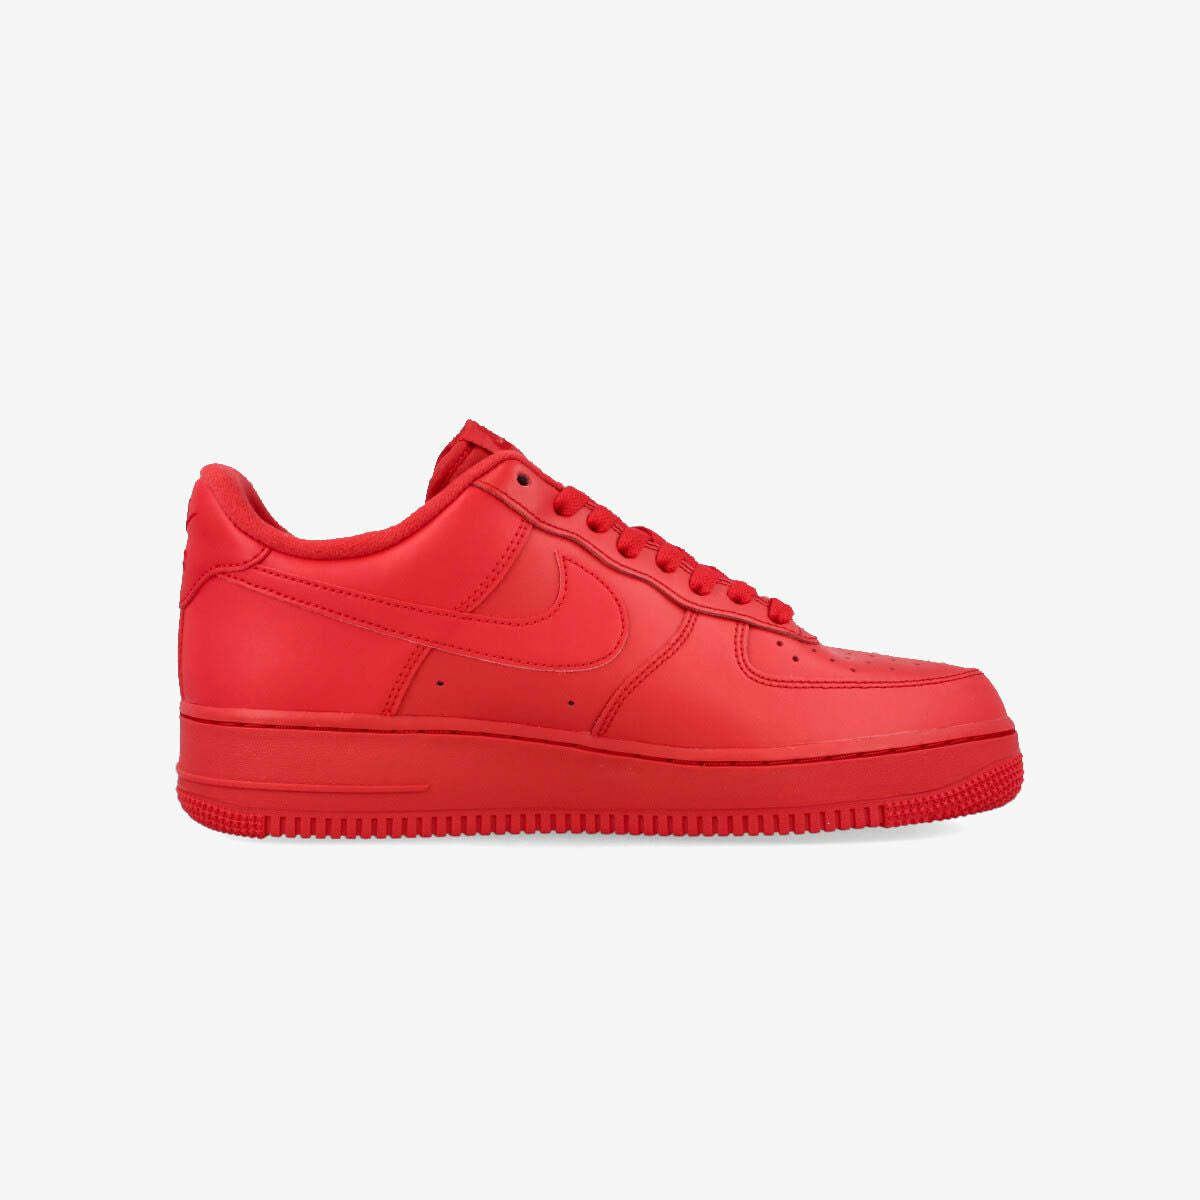 NIKE AIR FORCE 1 '07 LV8 1 UNIVERSITY RED/UNIVERSITY RED cw6999